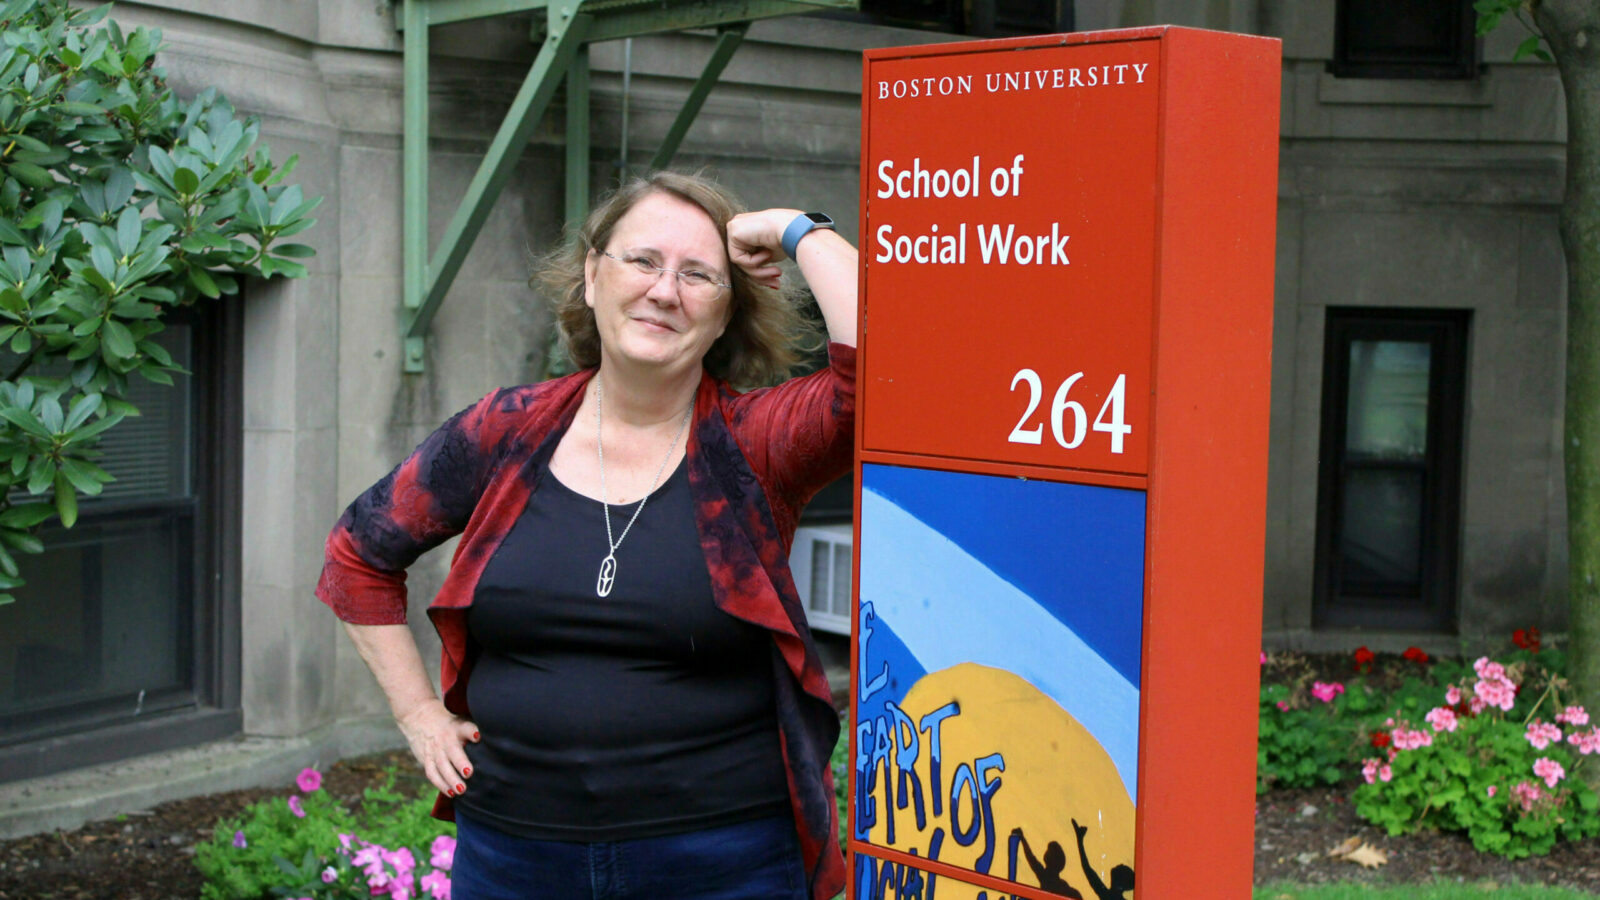 Lecturer Michelle Walsh poses in front of BUSSW next to School of Social Work sign